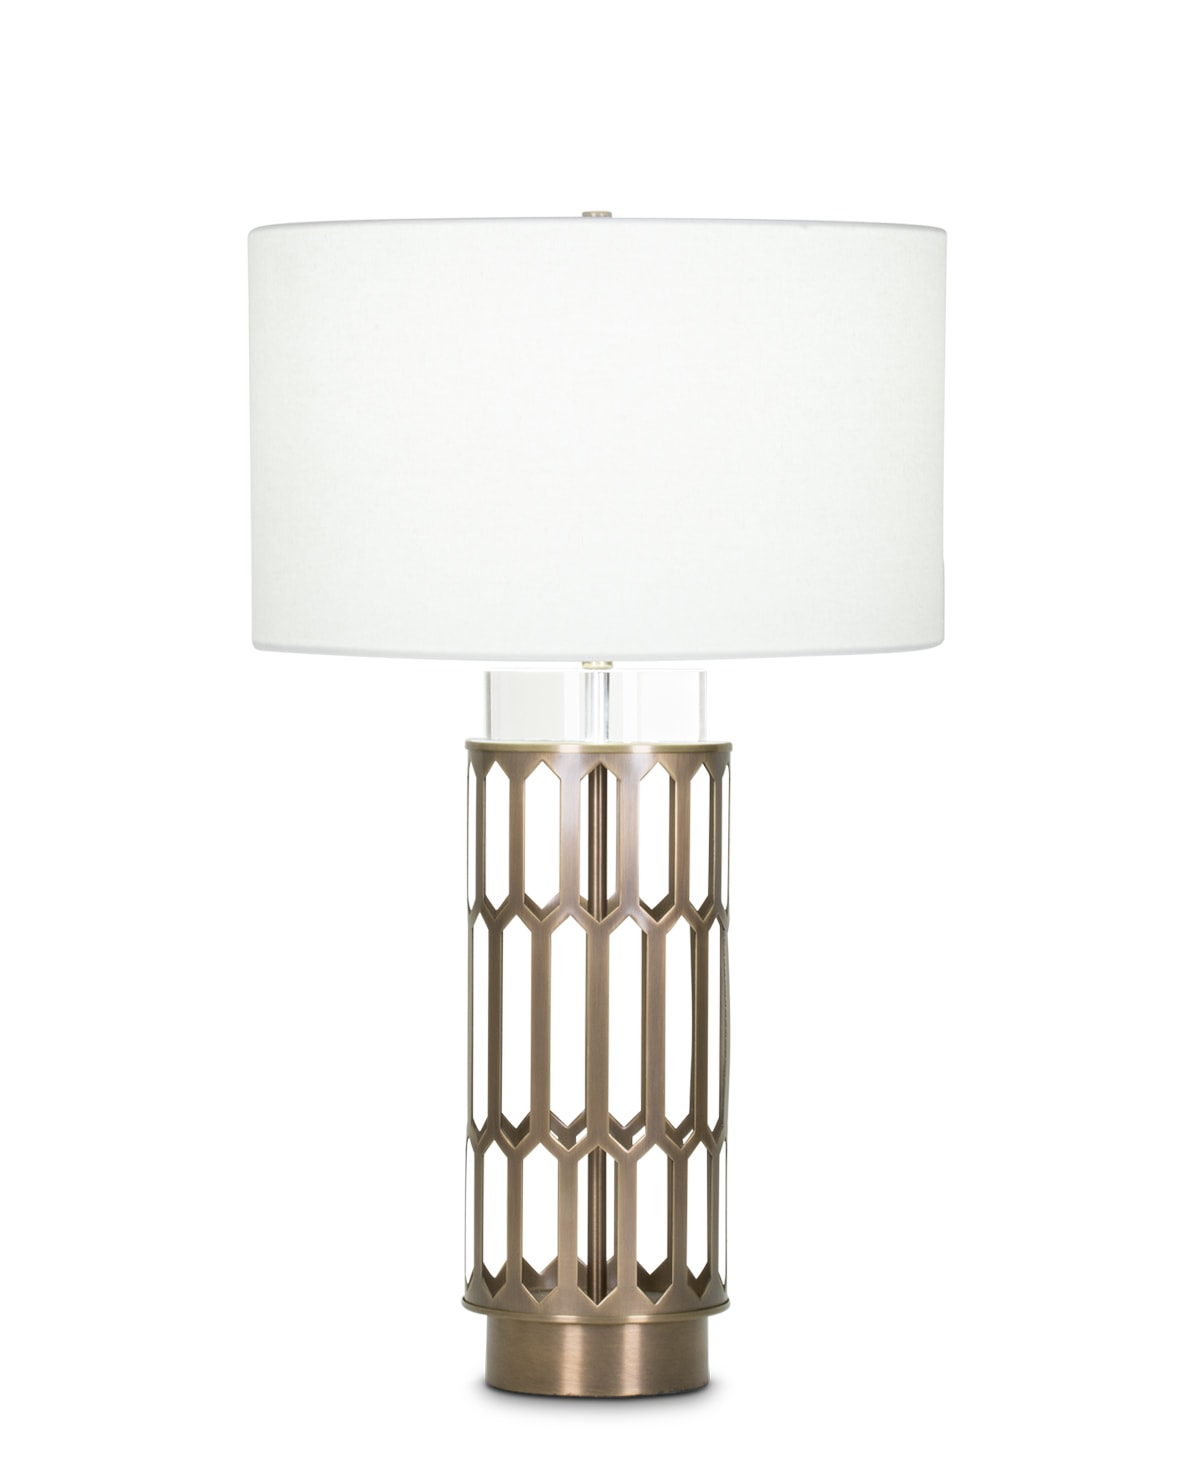 FlowDecor Portia Table Lamp in metal with antique brass finish and crystal and off-white linen drum shade (# 4005)